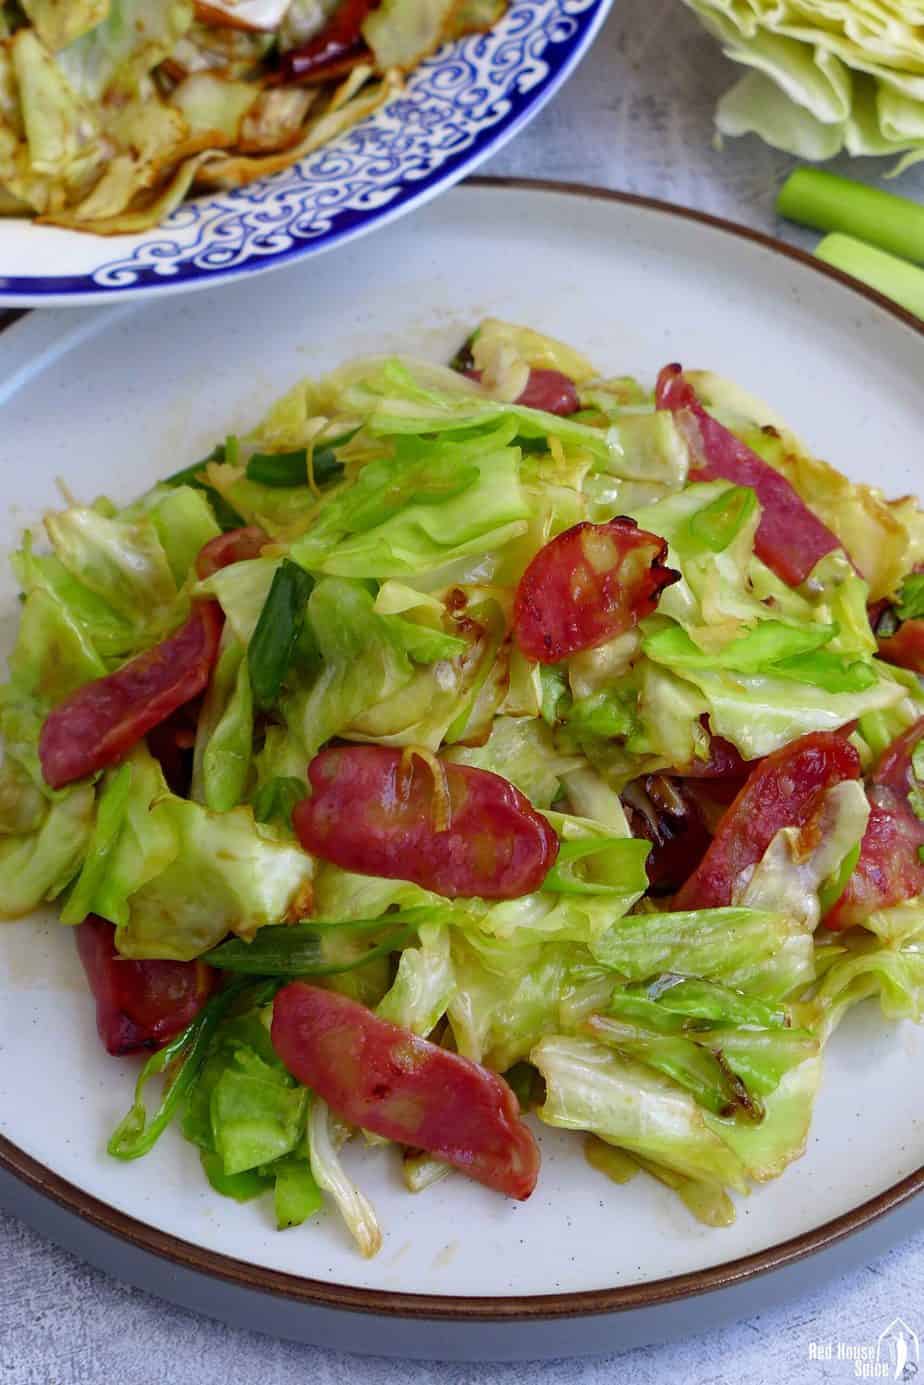 Stir-fried cabbage with Chinese sausage